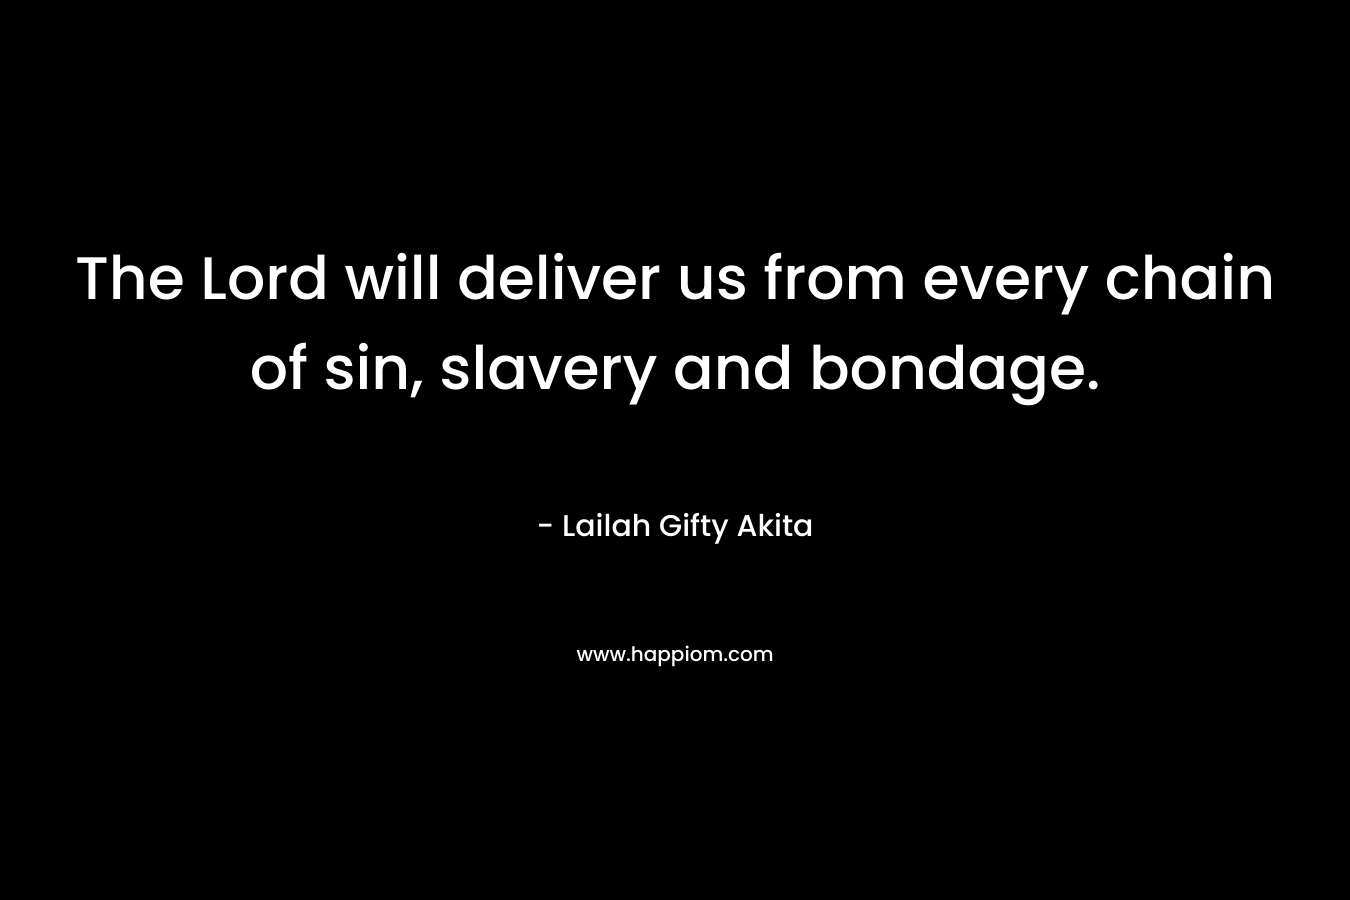 The Lord will deliver us from every chain of sin, slavery and bondage. – Lailah Gifty Akita